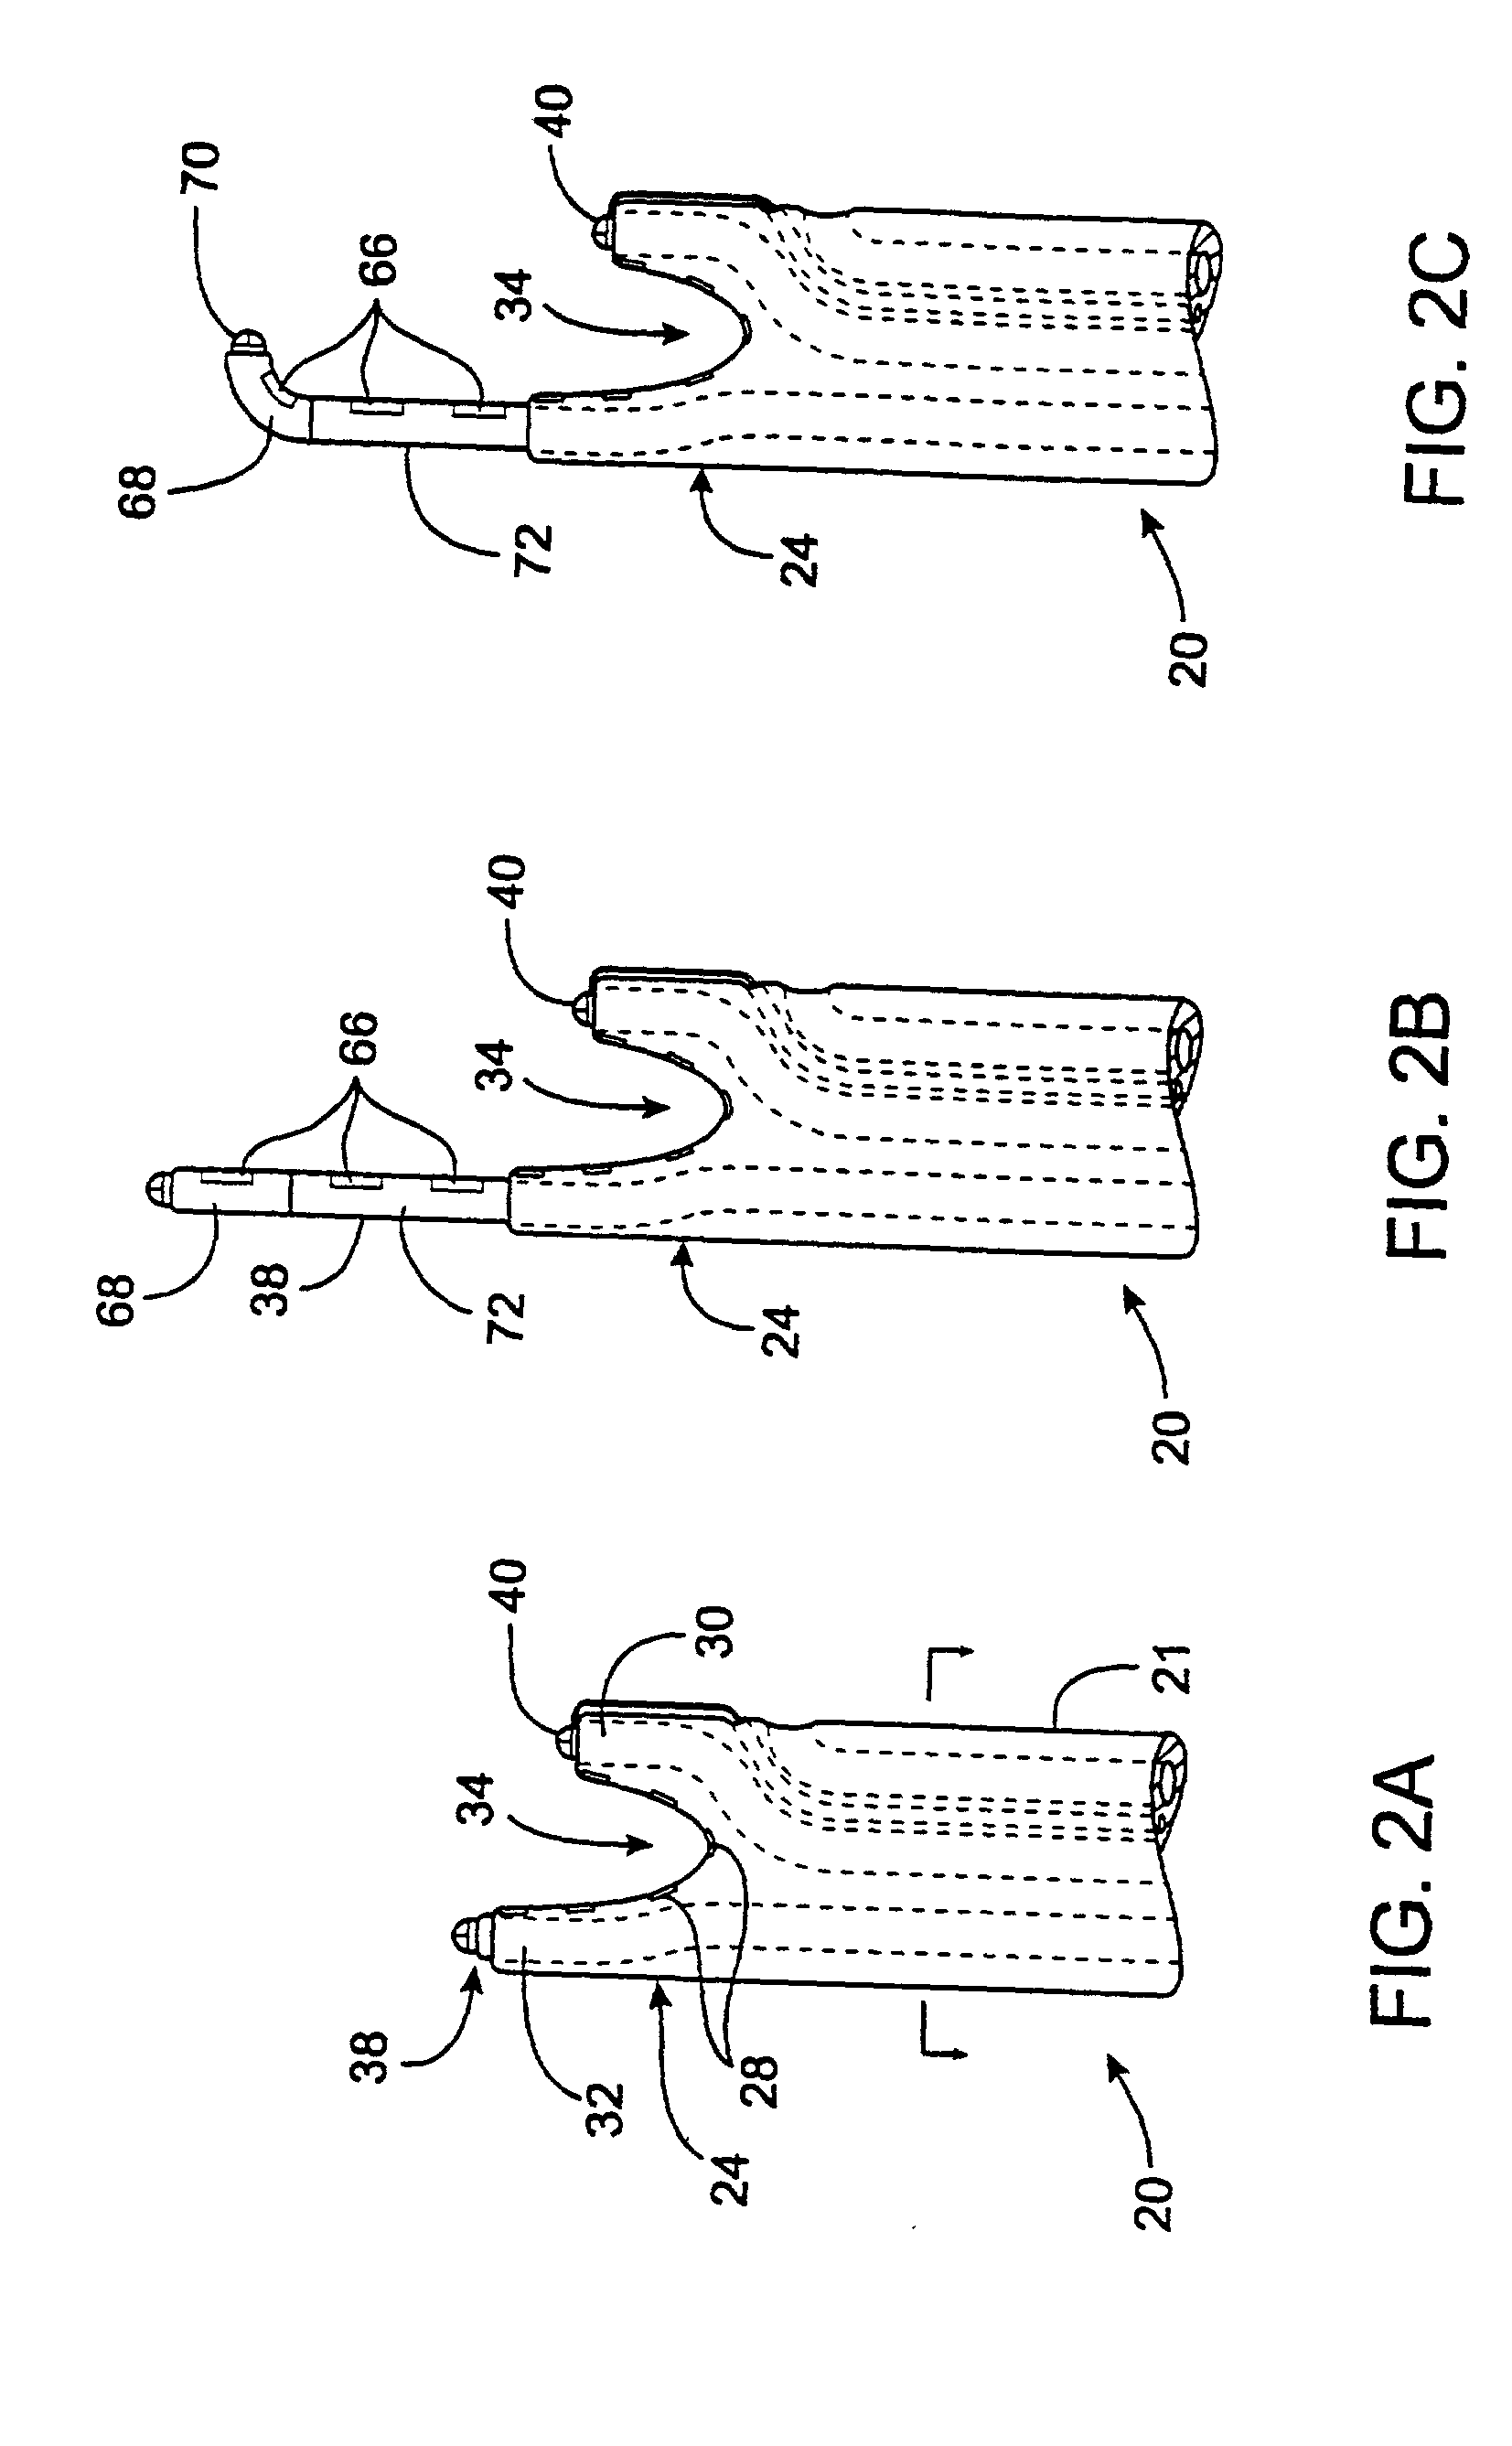 Device and method for forming a lesion